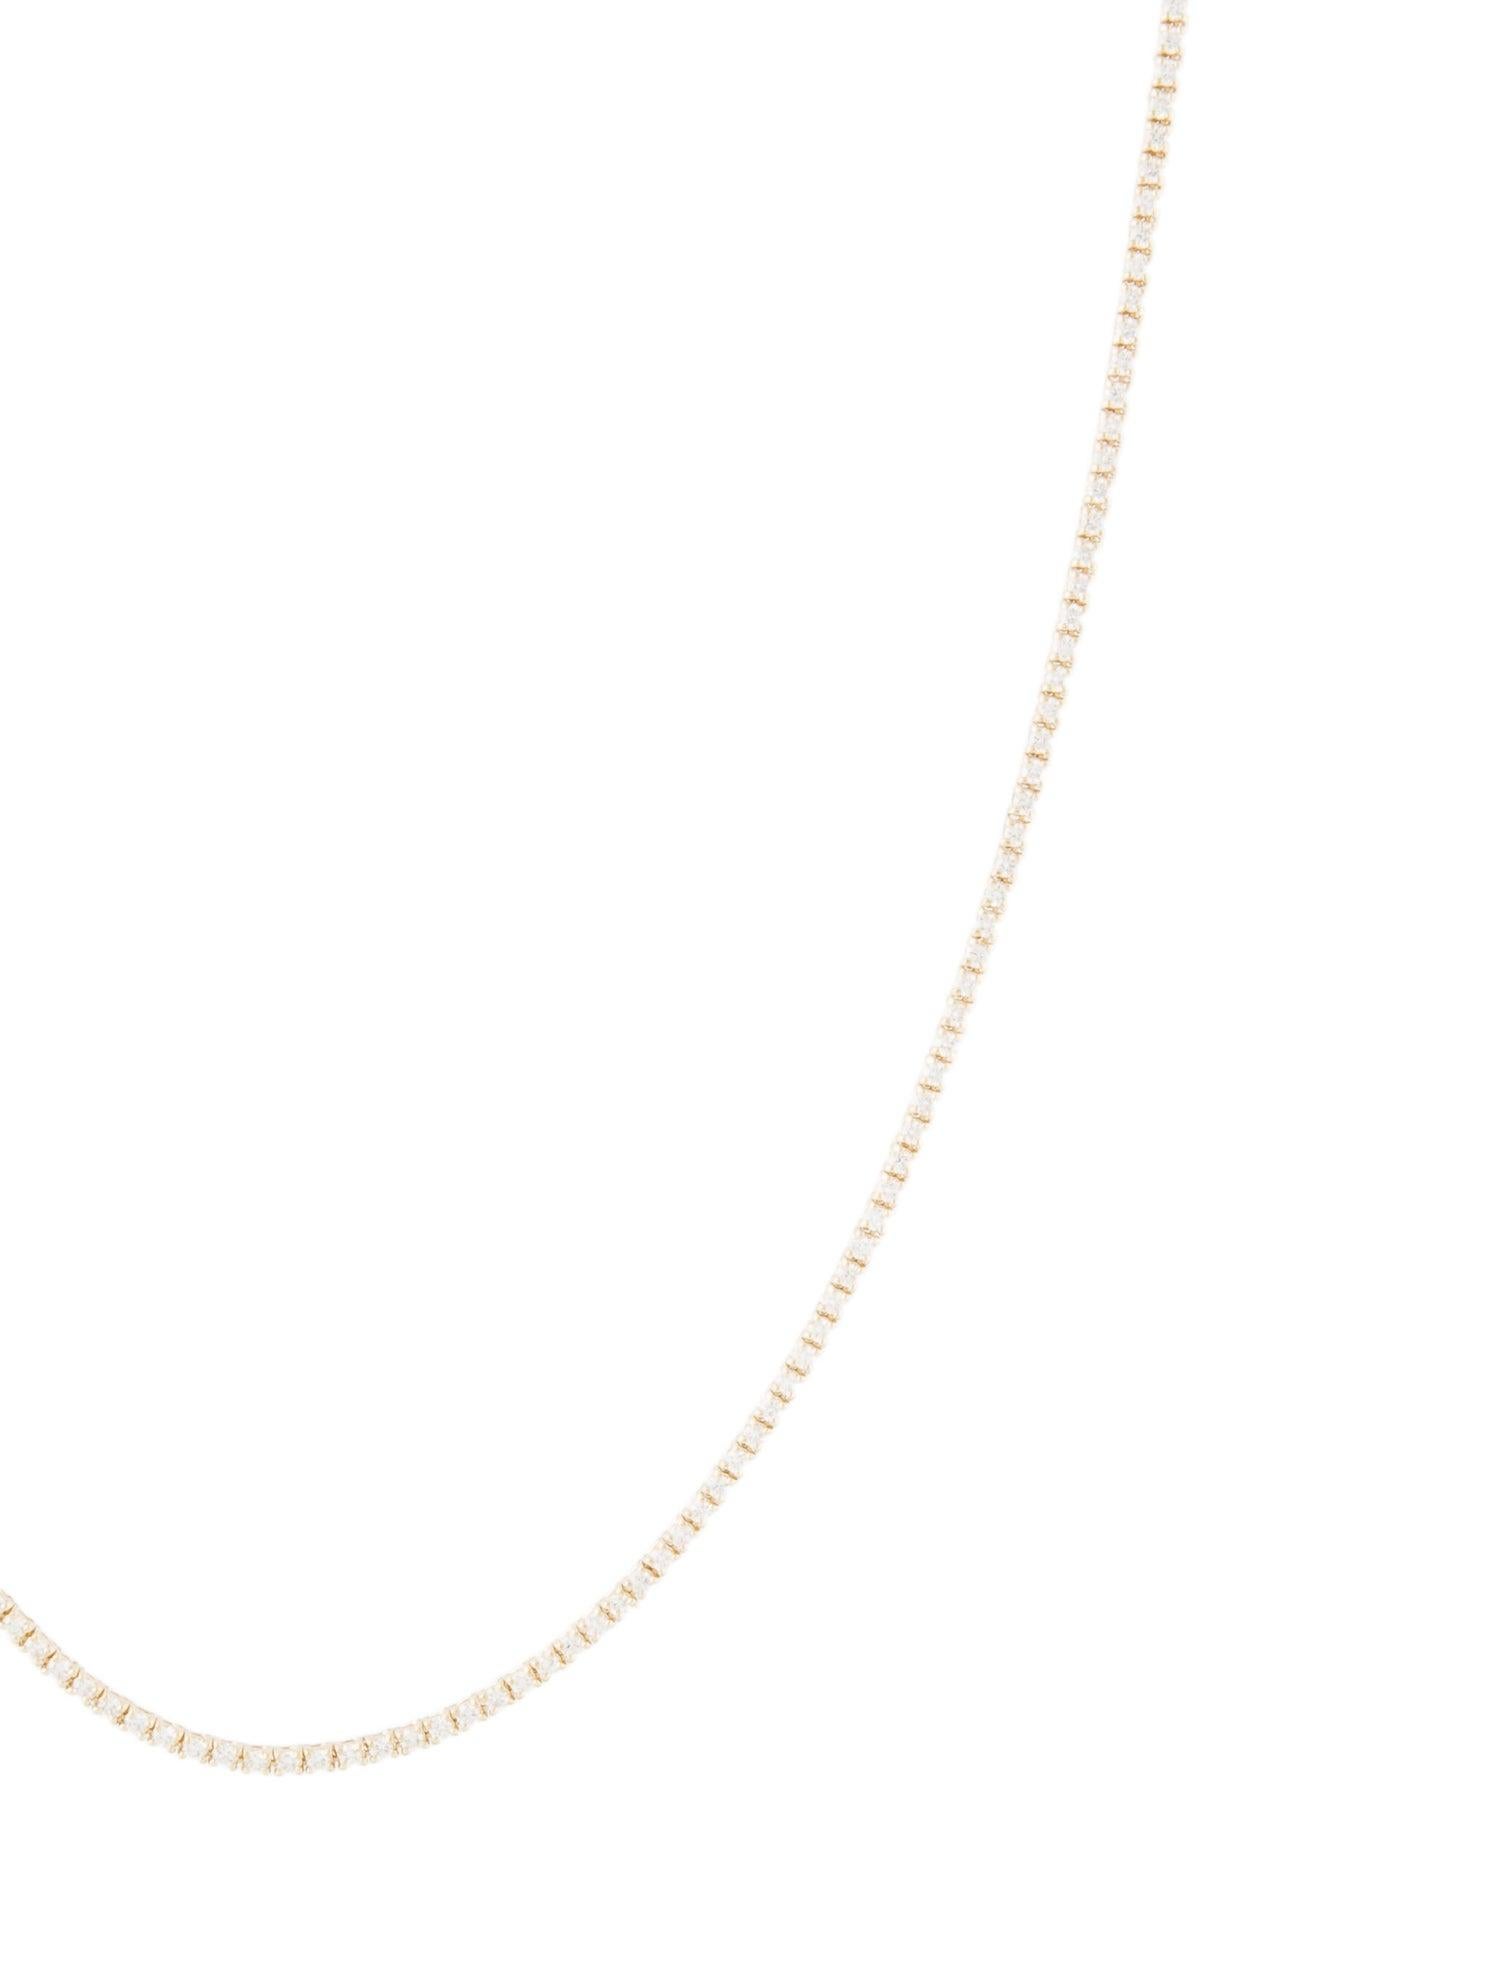 This Classic, Elegant and Beautiful Diamond Necklace will make your look so Glamourous! Crafted of 14K Gold this necklace features 213 natural round white Diamonds weighing approximately 3.12 carats. Necklace measure 17